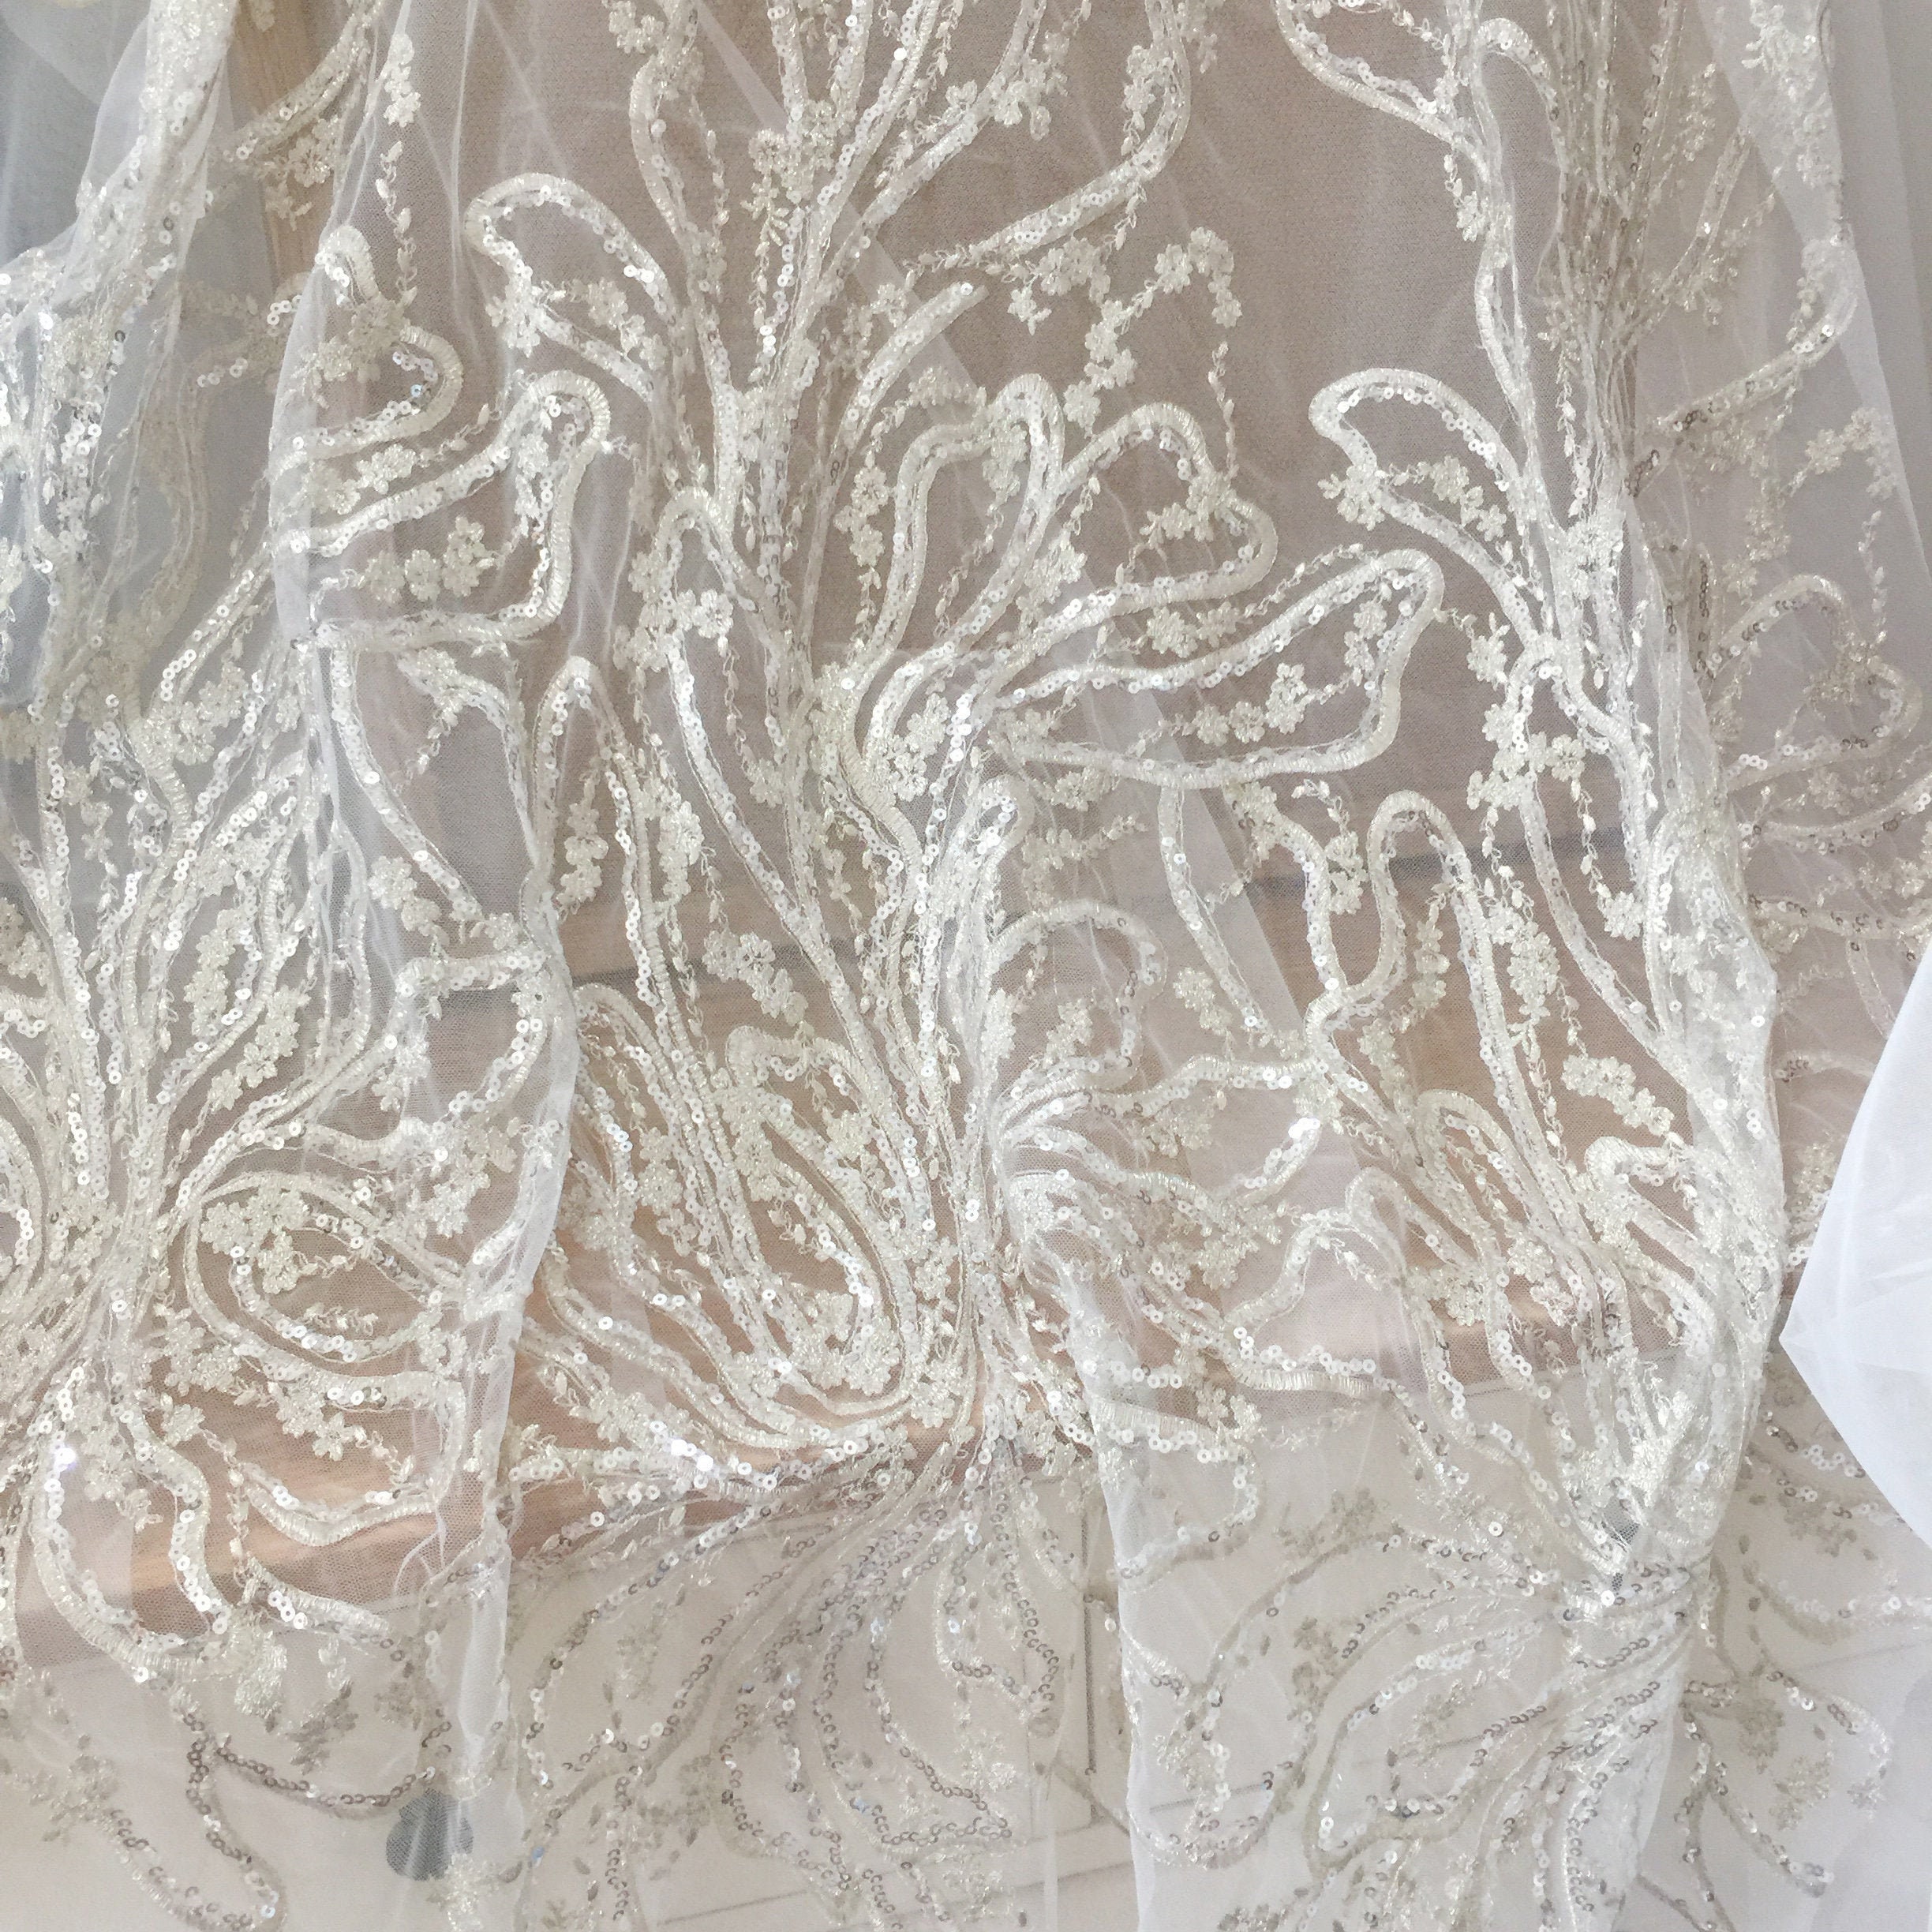 Luxury Silver Thread Embroidery tulle lace fabric by yard | Etsy